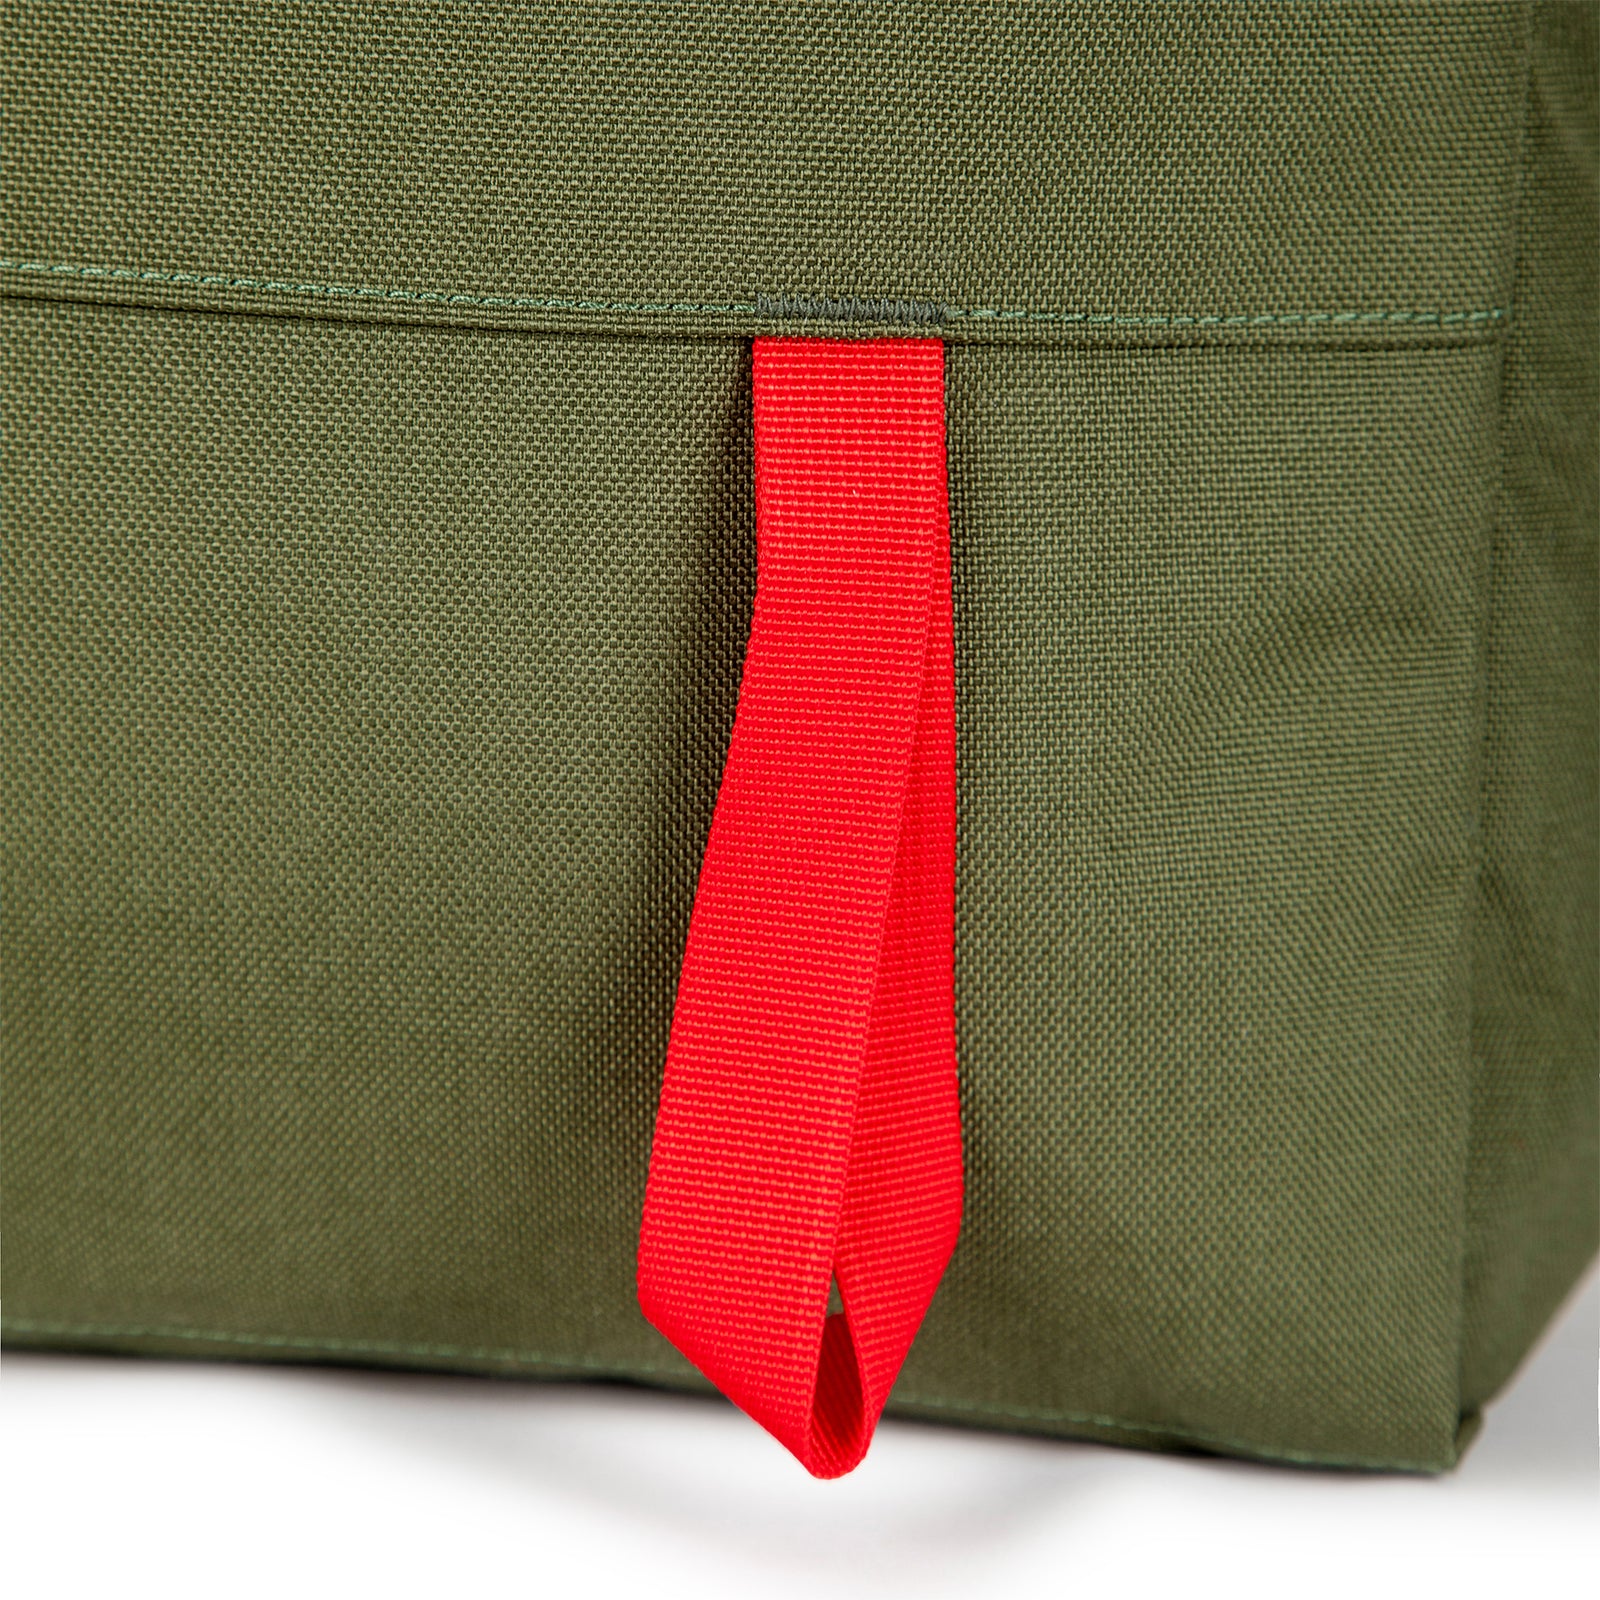 General shot of ice axe loop on Topo Designs Daypack Classic 100% recycled nylon laptop backpack for work or school in Olive green.